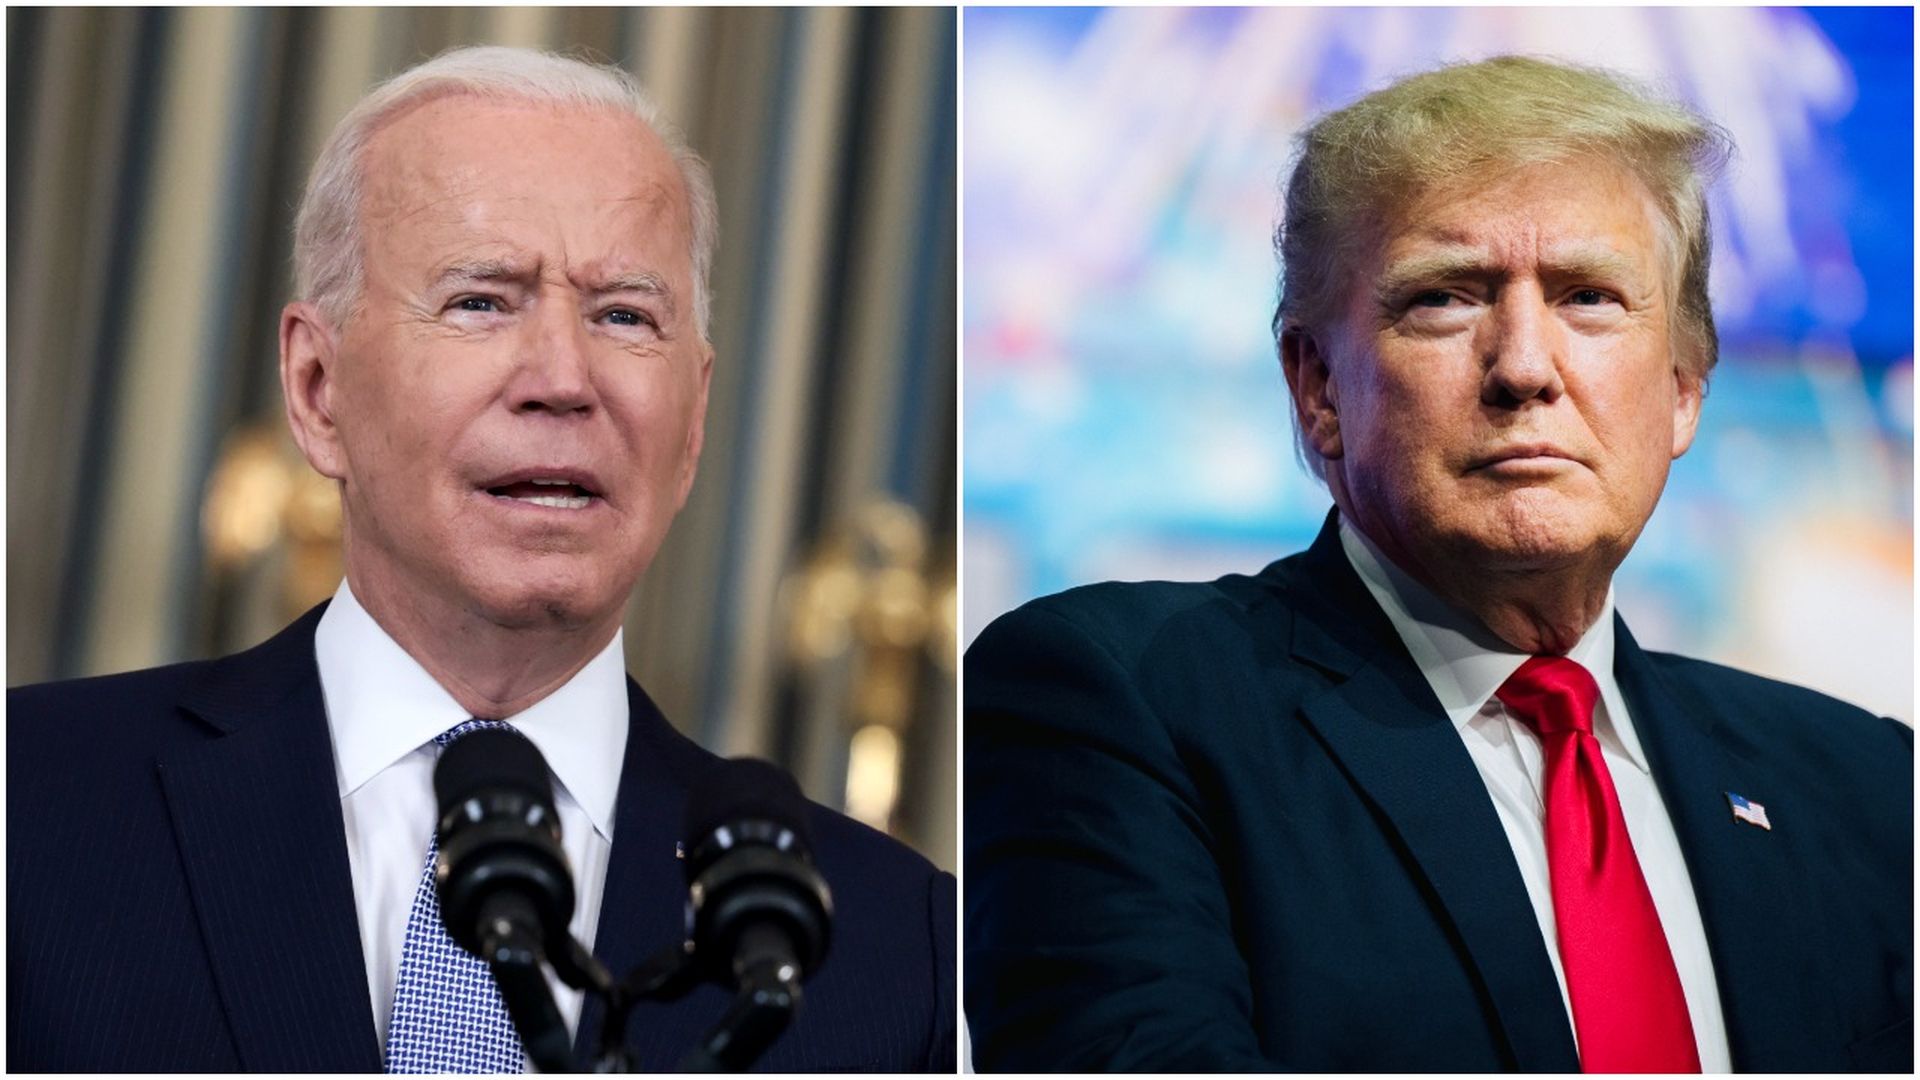 Photo of Joe Biden on the left and Donald Trump on the right